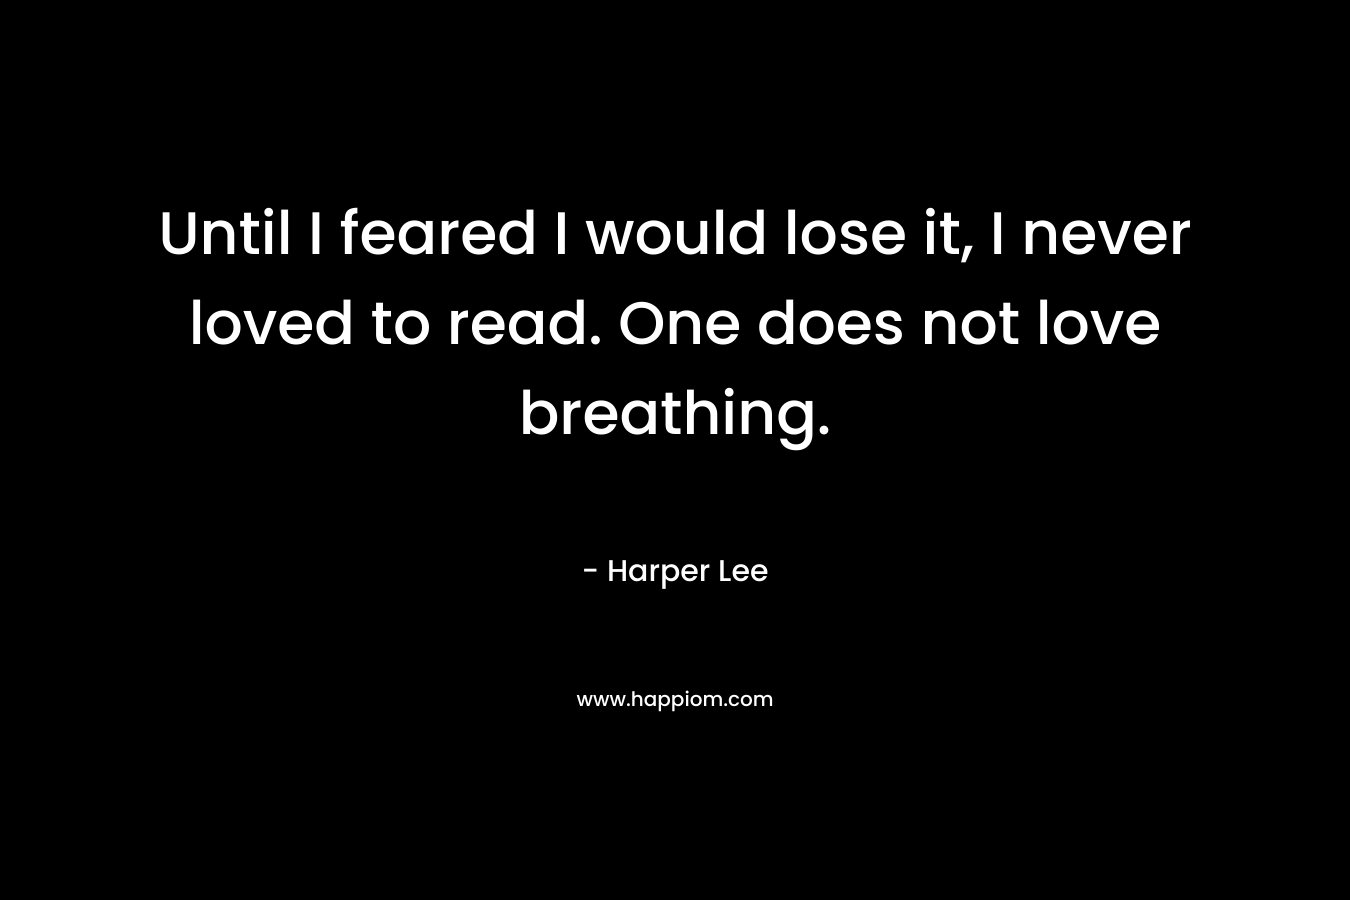 Until I feared I would lose it, I never loved to read. One does not love breathing. – Harper Lee